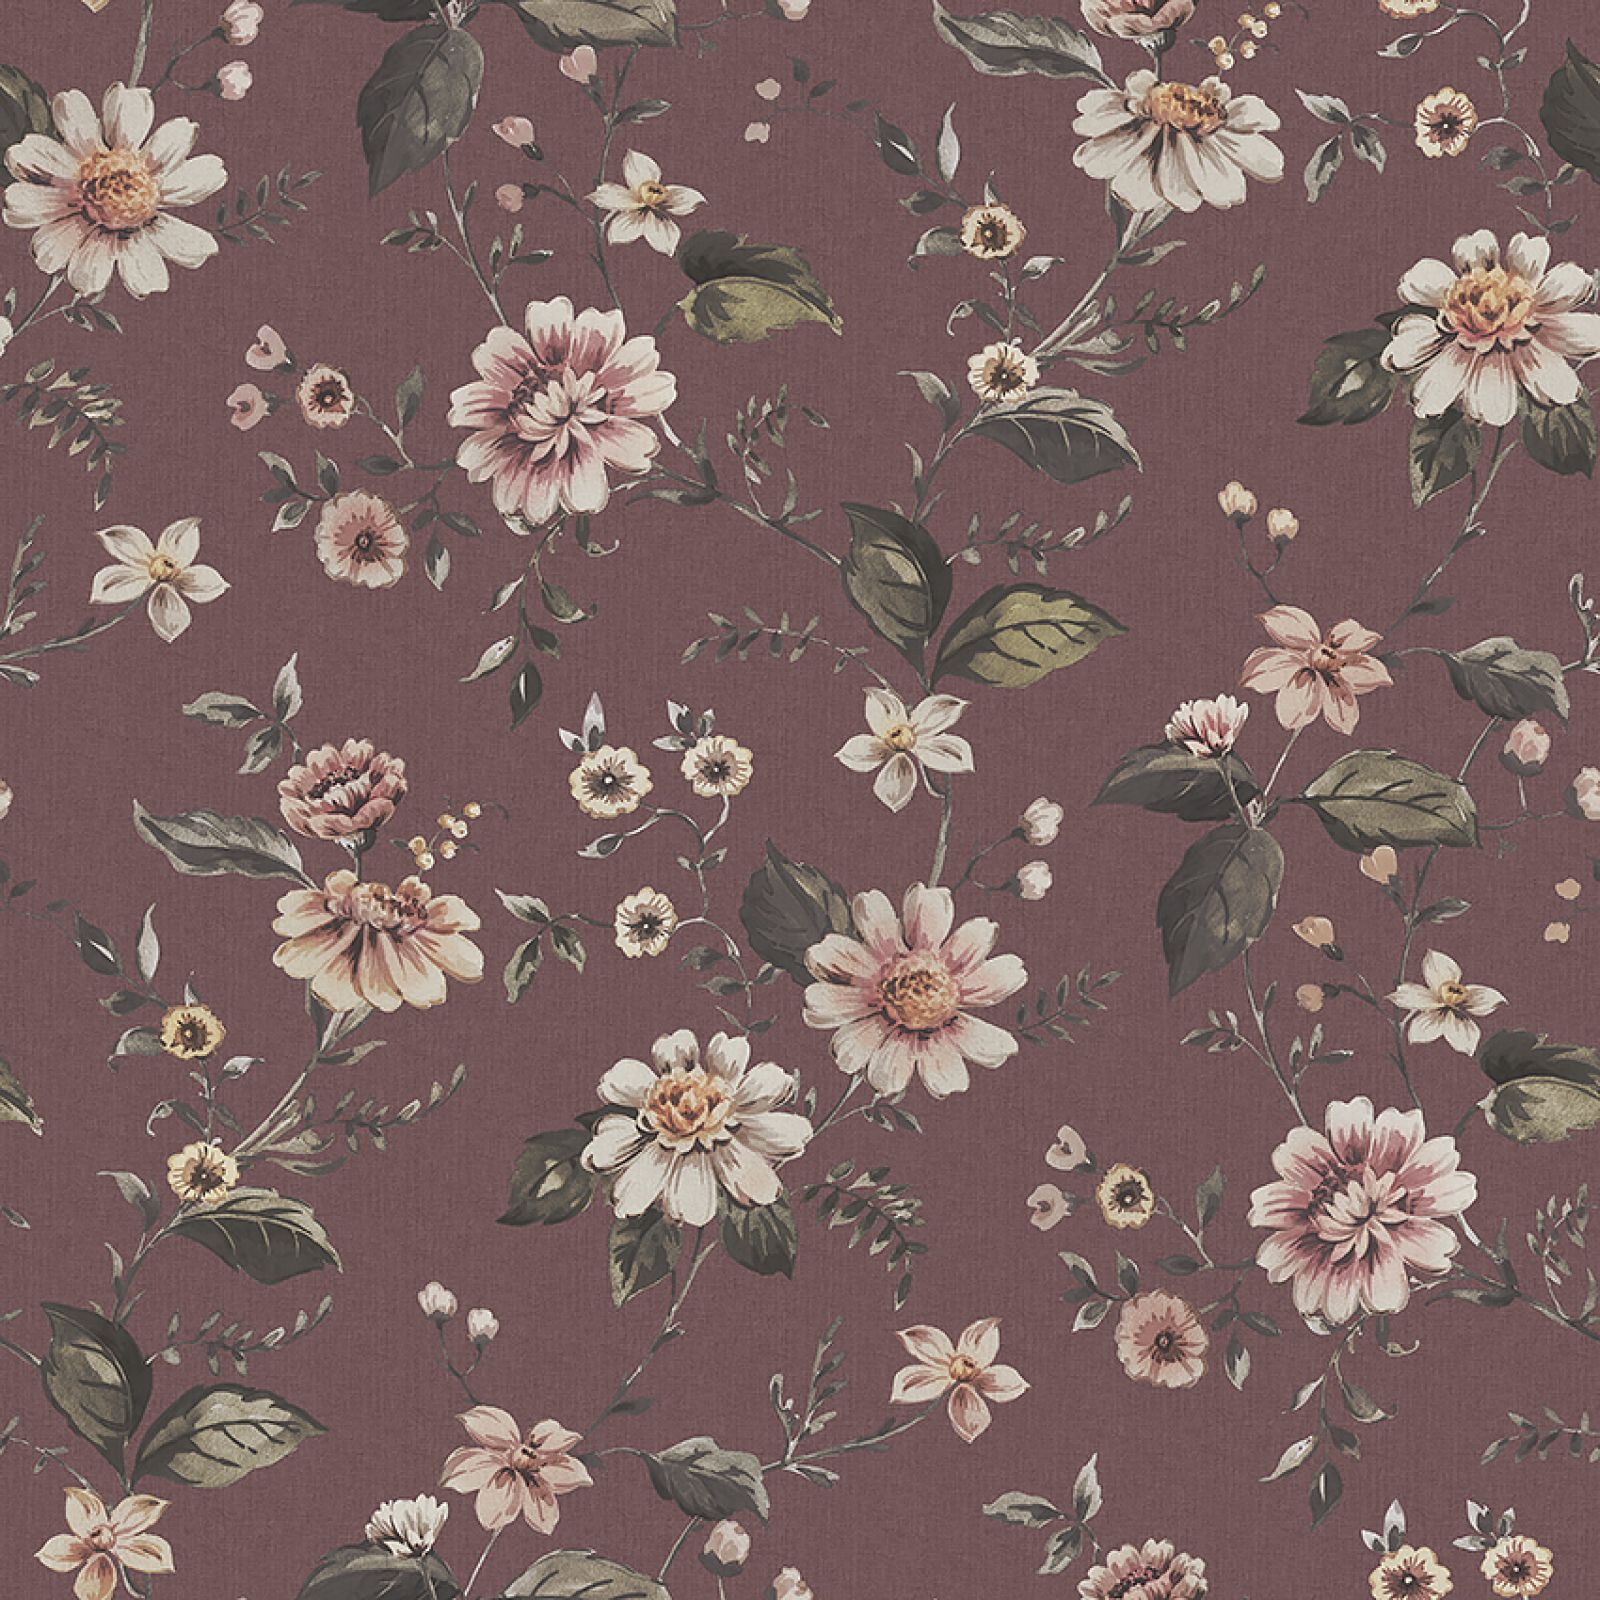 Marion’s Flowers wallpaper with an aubergine, white or grey background